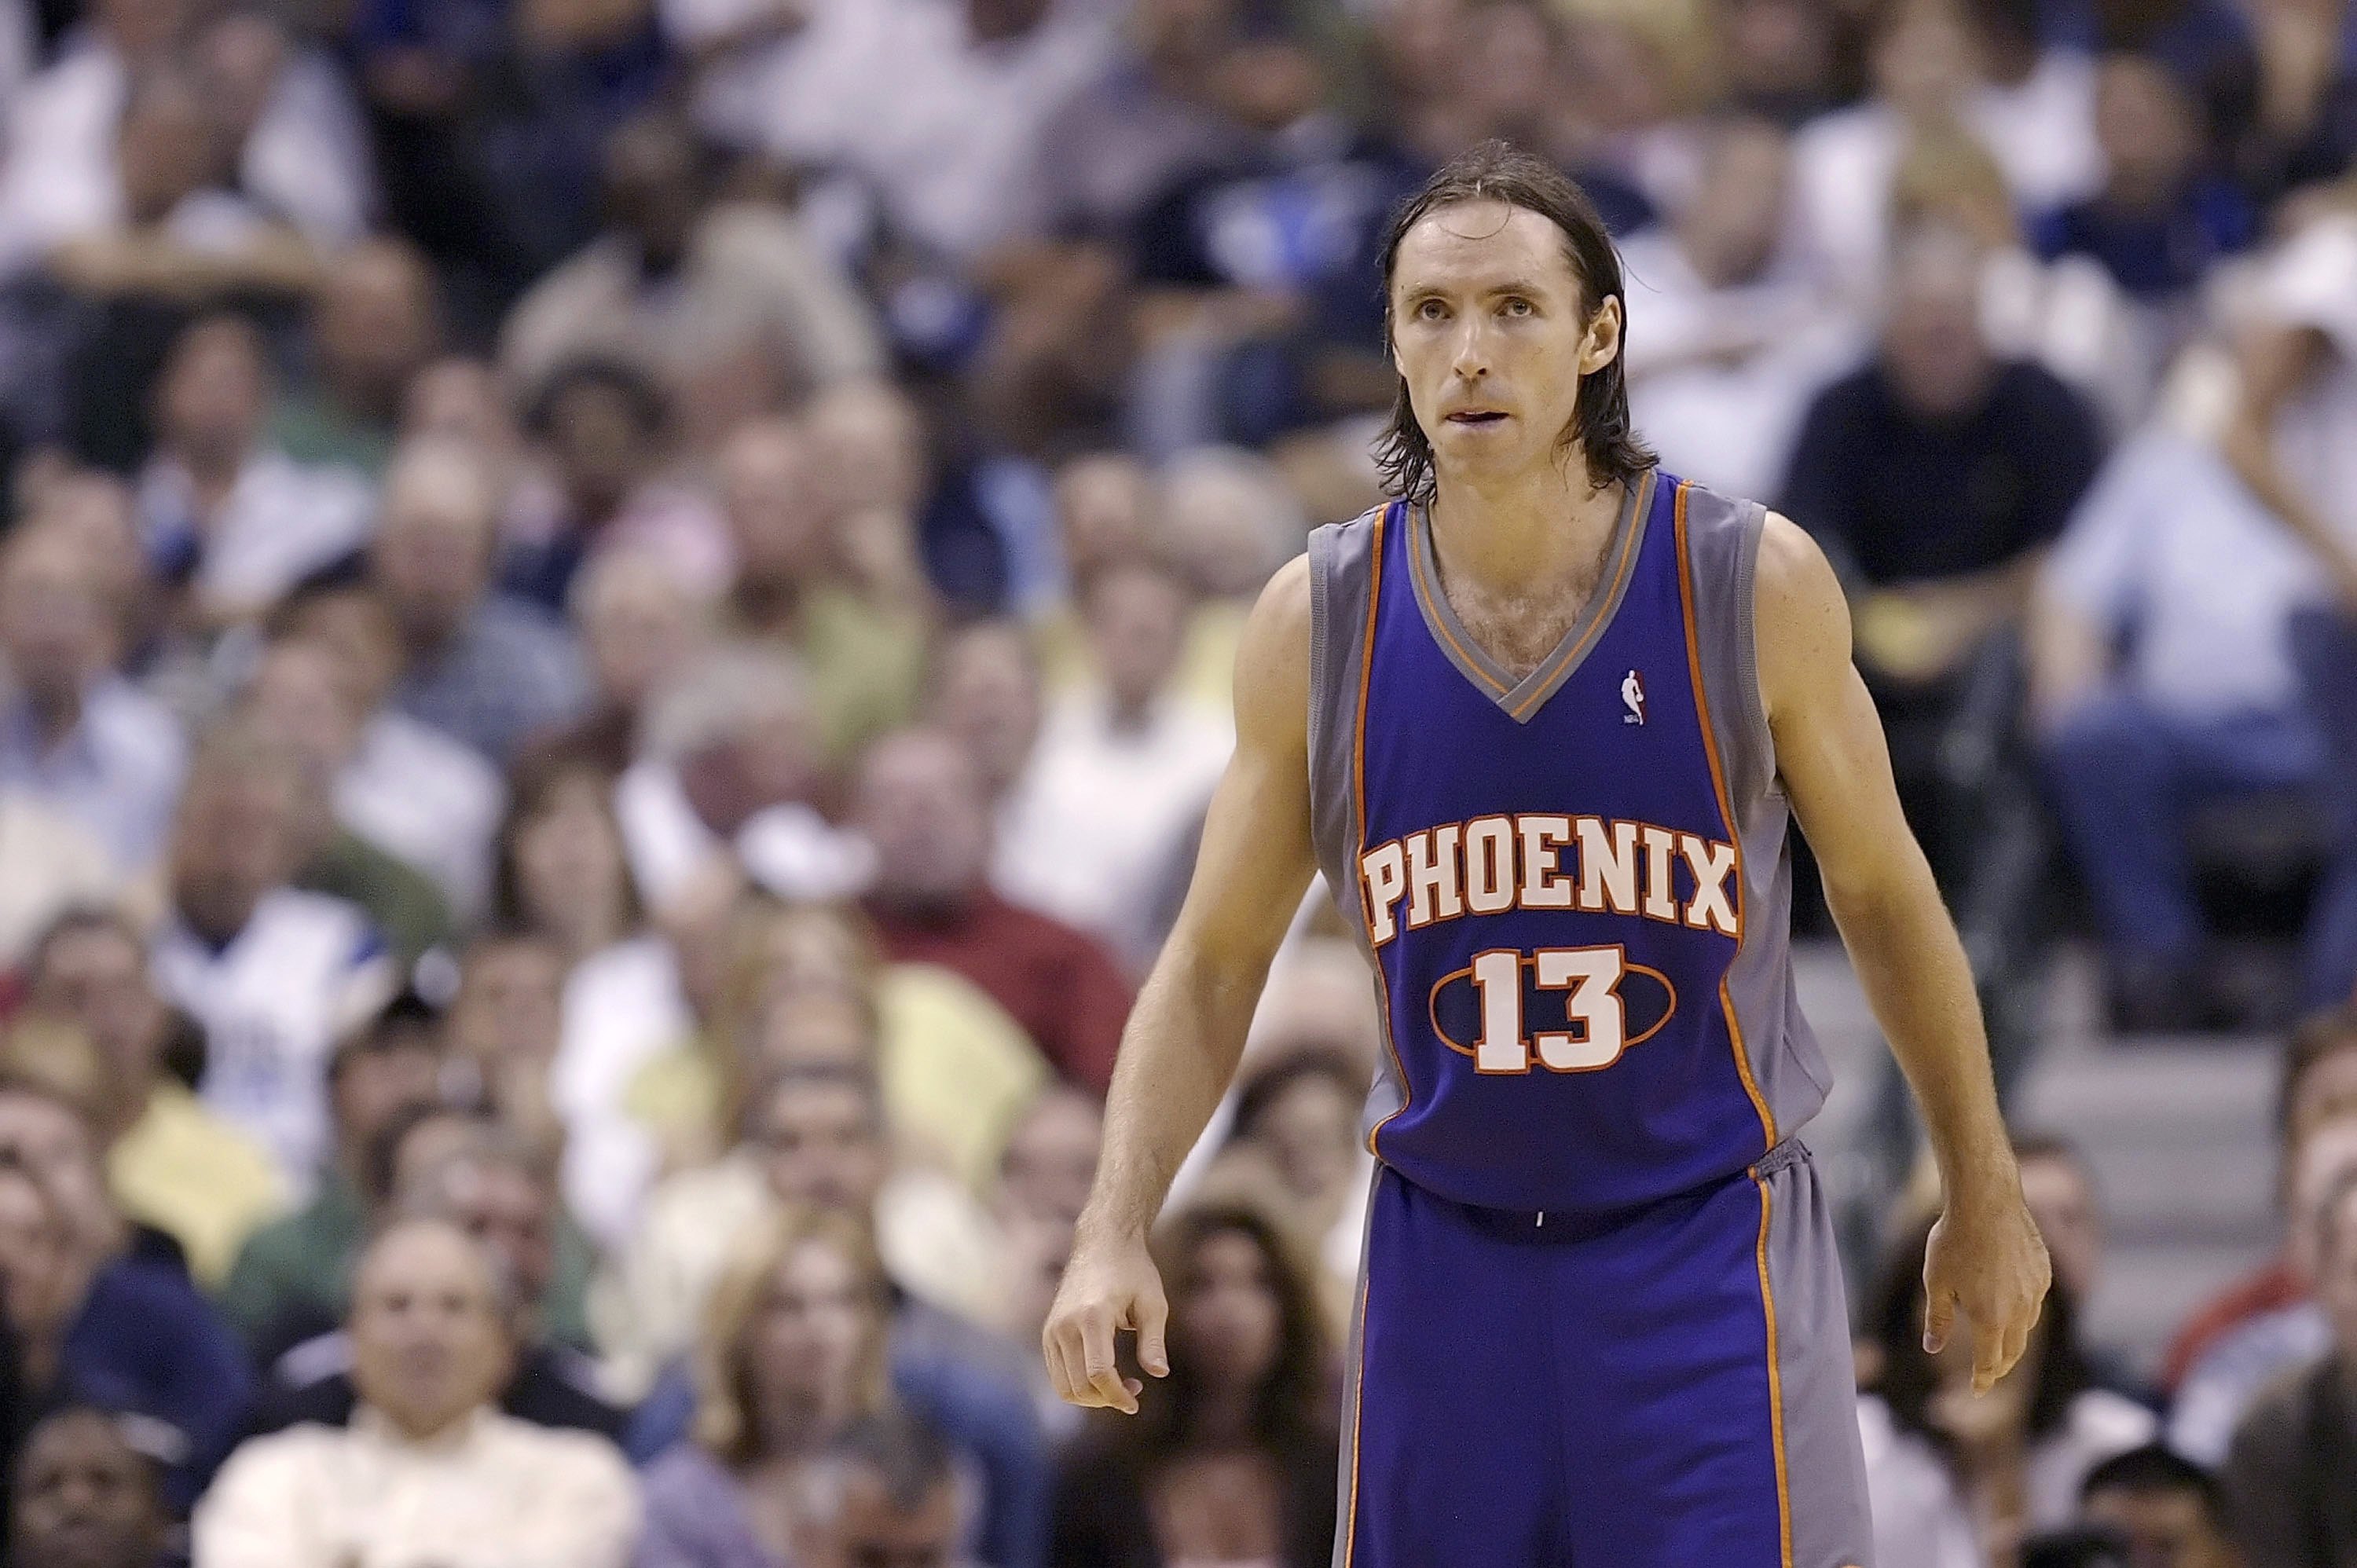 Bickley: Steve Nash changed basketball in Phoenix and beyond